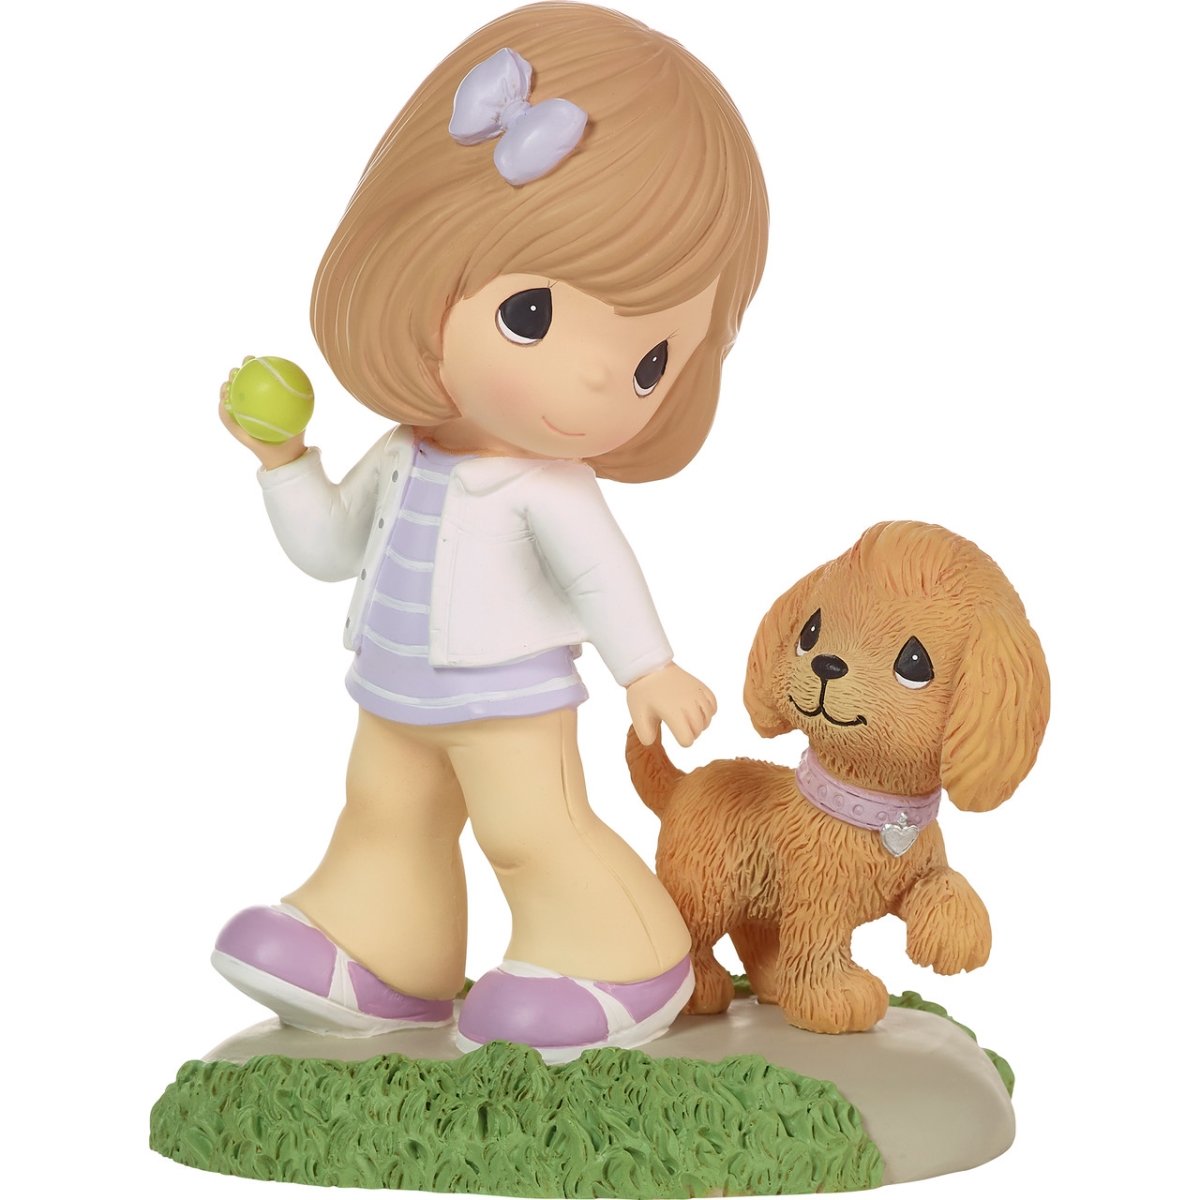 Picture of Be the Light Christian Bookstore 226404 5.5 in. Resin Girl Figurine with Golden Retriever, Multi Color